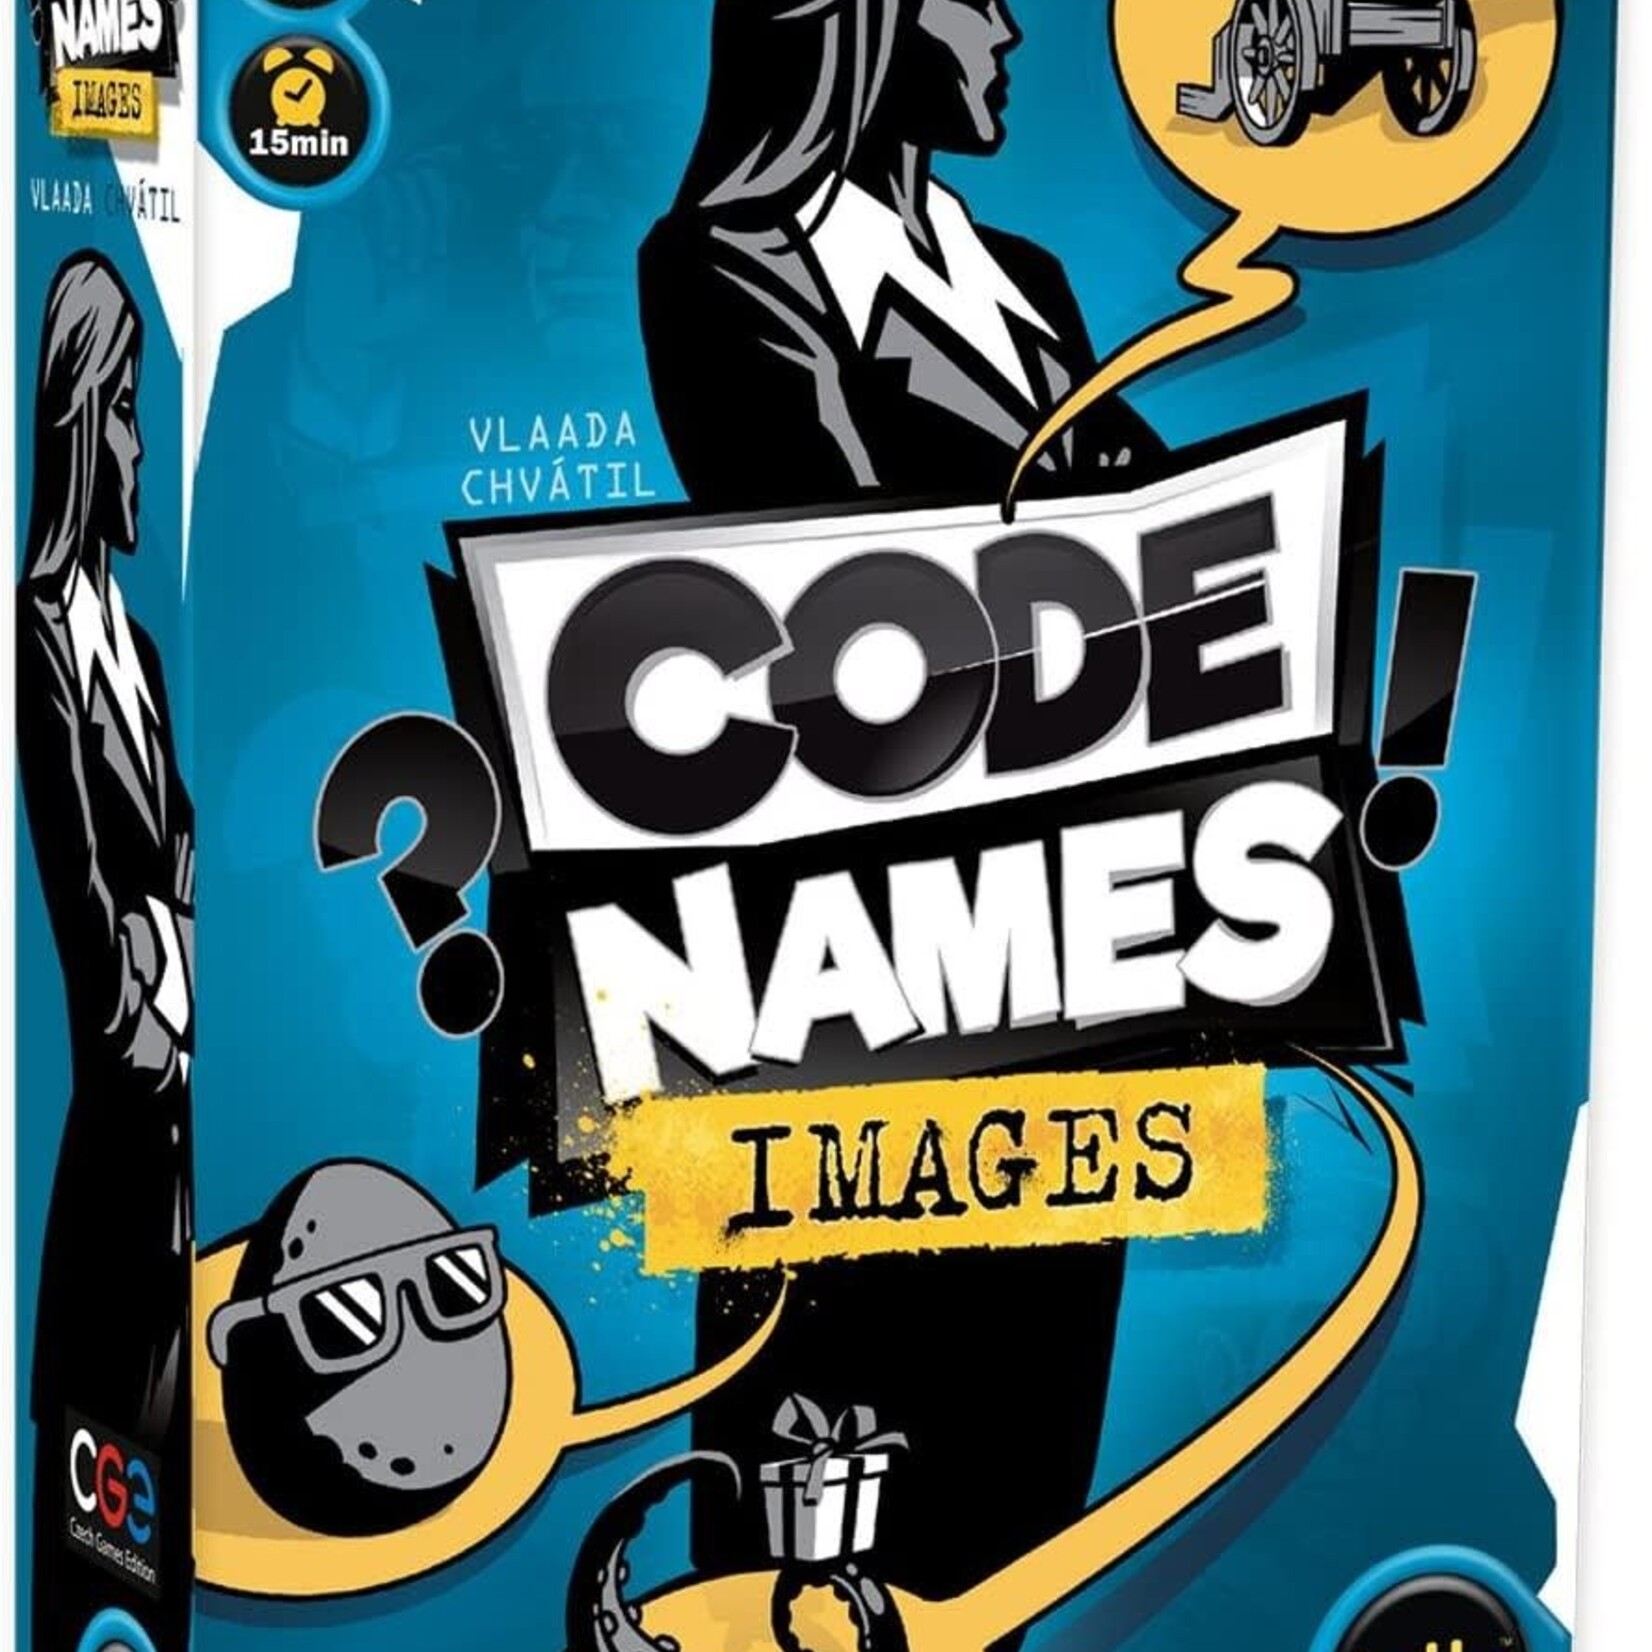 Code Names images - Guyajeux